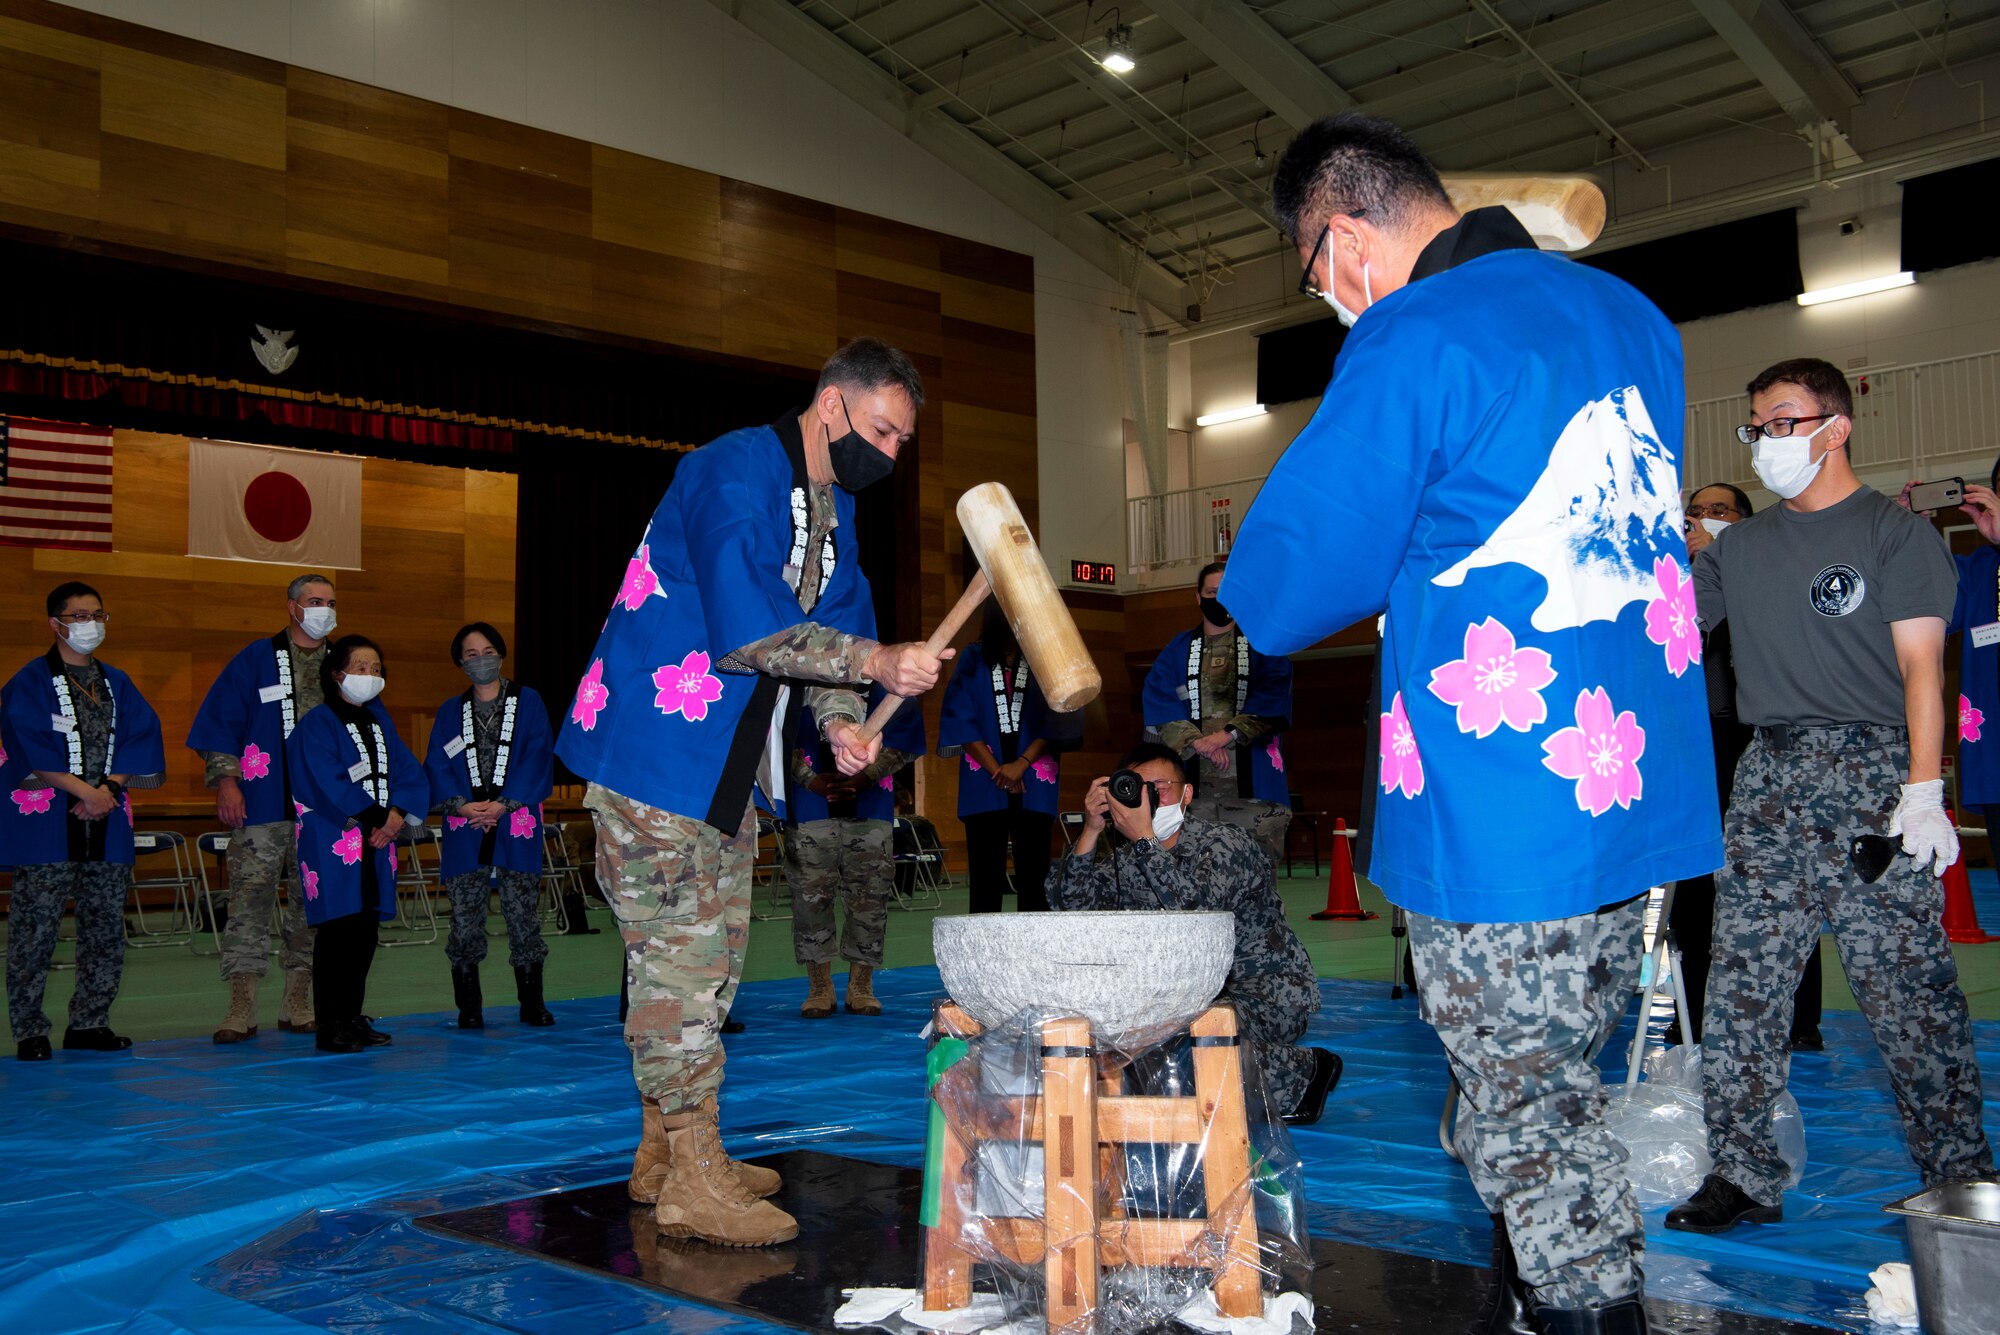 U.S. Air Force Col. Andrew Roddan, 374th Airlift Wing commander, and Japan Air Self-Defense Forces Col. Takashi Izuhara, Operation Support Wing commander, take turns pounding mochi at the Operation Support Wing annual mochi pounding ceremony on Dec. 14, 2022, Yokota Air Base, Japan. The process of making mochi is a culturally significant symbol of teamwork and partnership, as it requires collaborative time and effort. (U.S. Air Force photo by Tech Sgt. Taylor A. Workman)